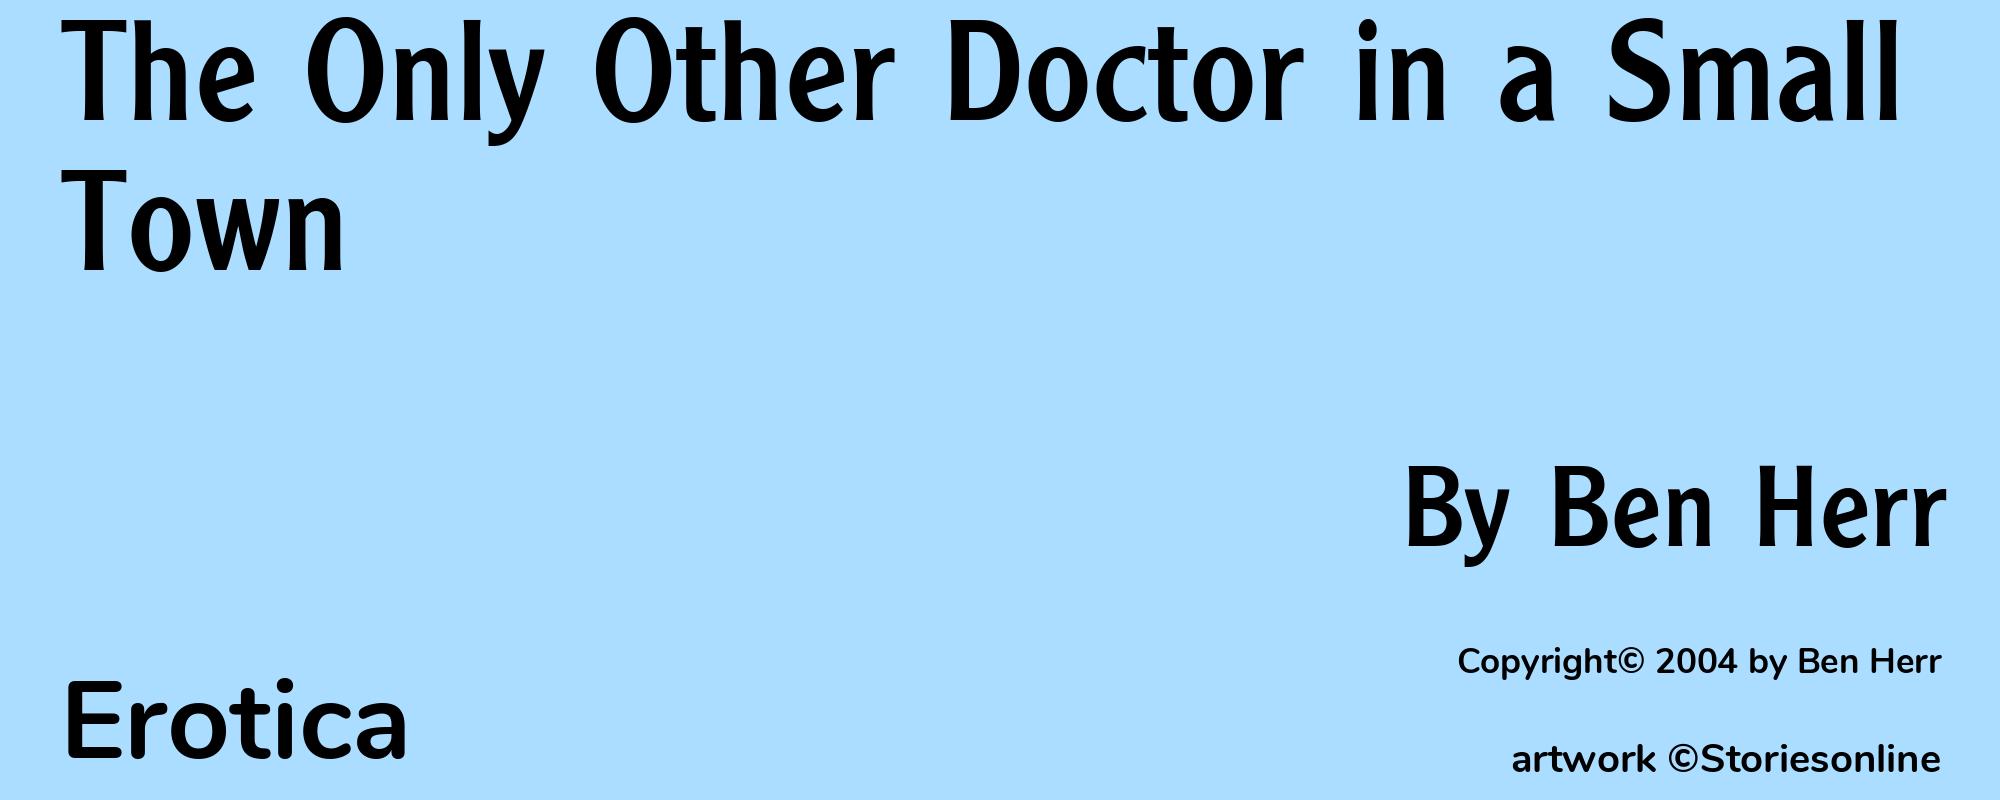 The Only Other Doctor in a Small Town - Cover